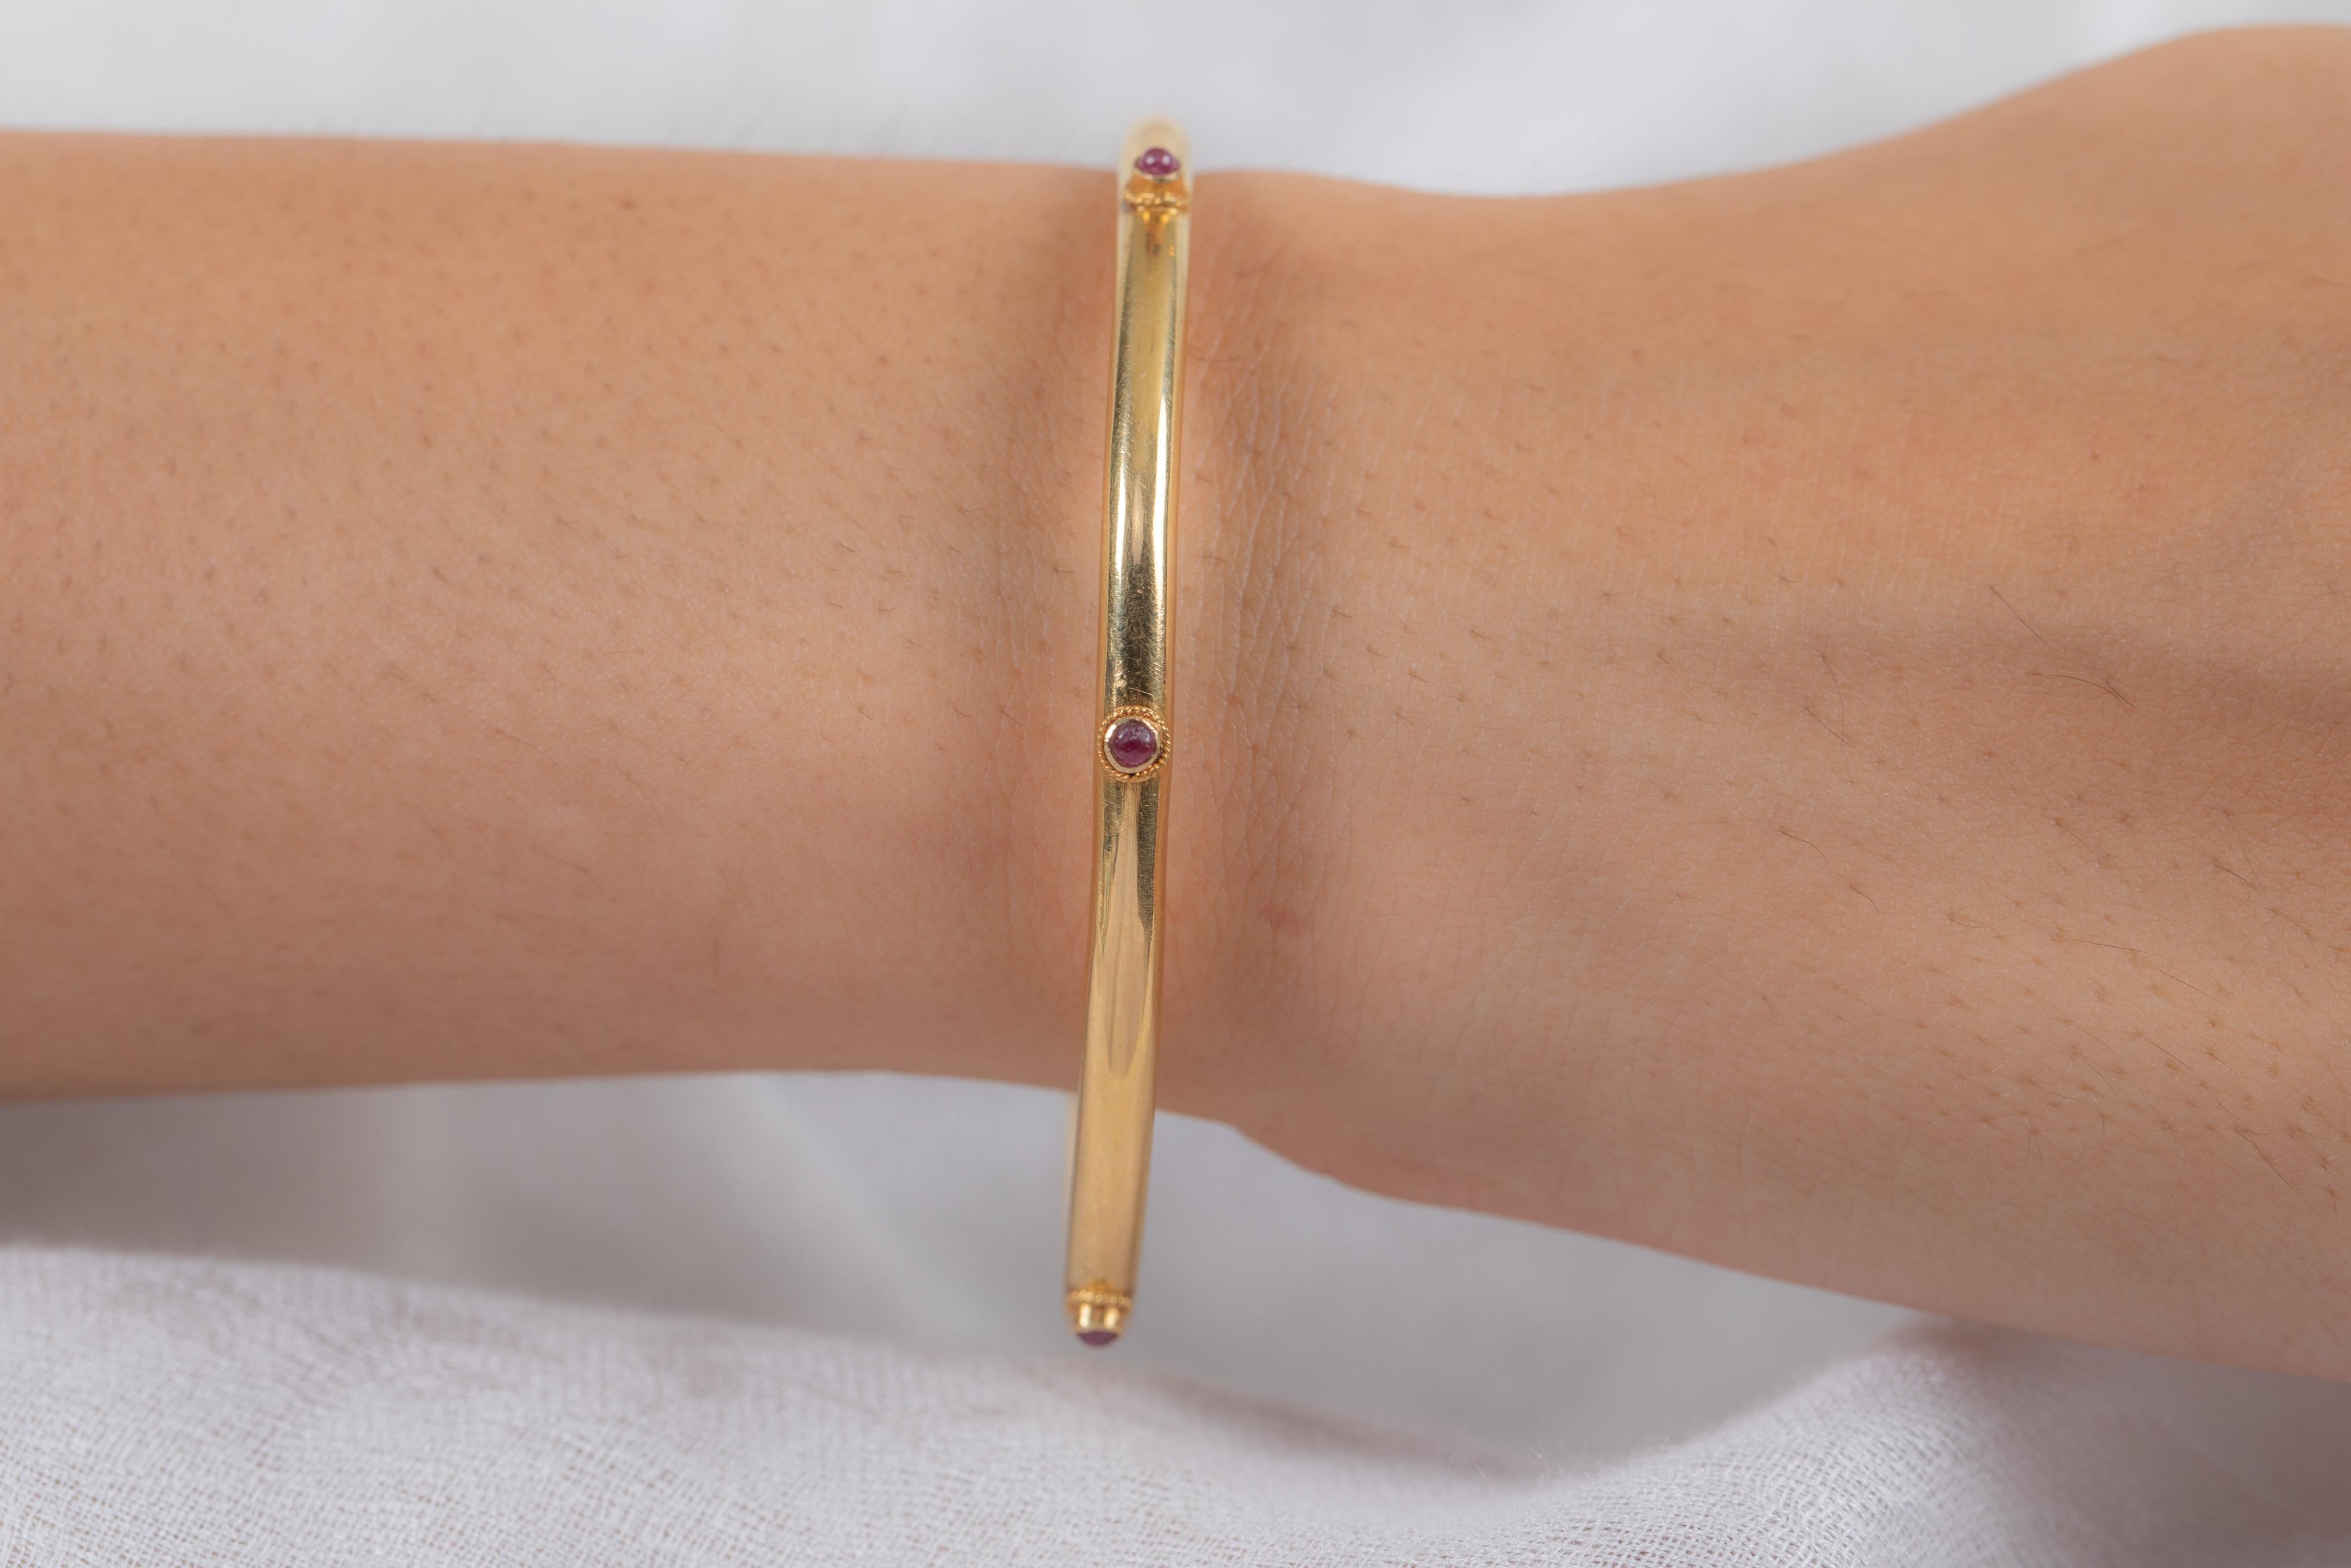 Ruby Bangle in 18K Gold. It’s a great jewelry ornament to wear on occasions and at the same time works as a wonderful gift for your loved ones. These lovely statement pieces are perfect generation jewelry to pass on.
Bangles feel comfortable while